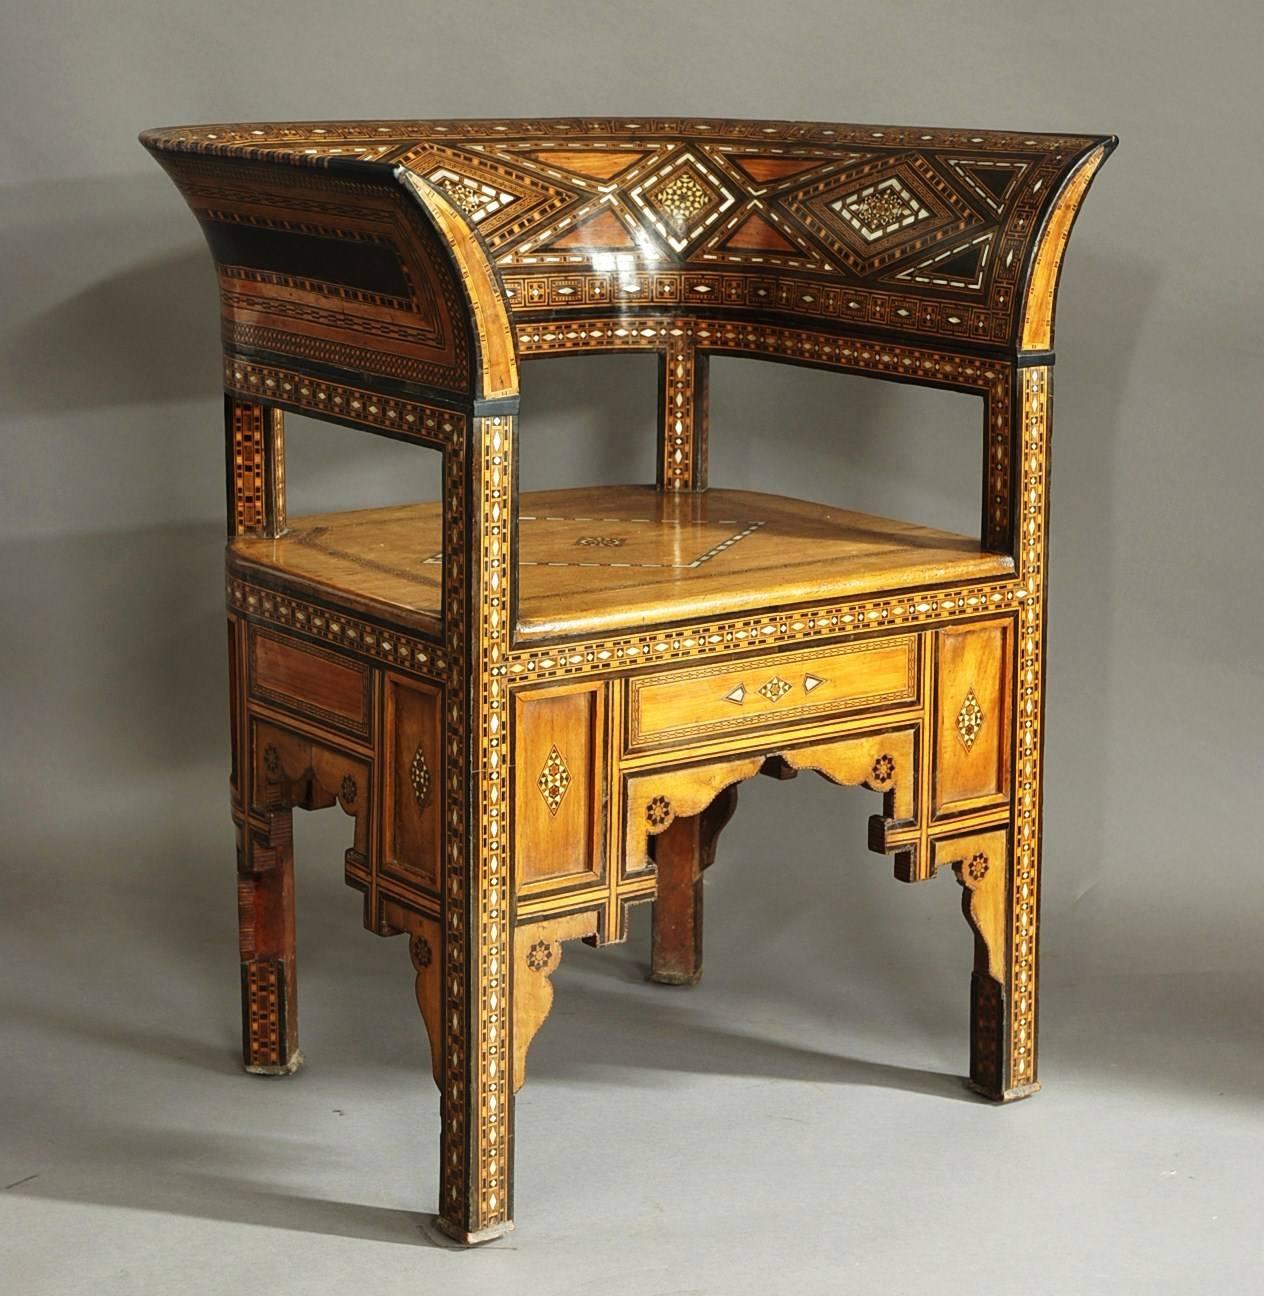 A highly decorative late 19th-early 20th century Middle Eastern Damascus inlaid armchair of superb patina.

This chair consists of a rounded back profusely inlaid with decorative mosaic geometric designs in excellent condition. 

These designs,